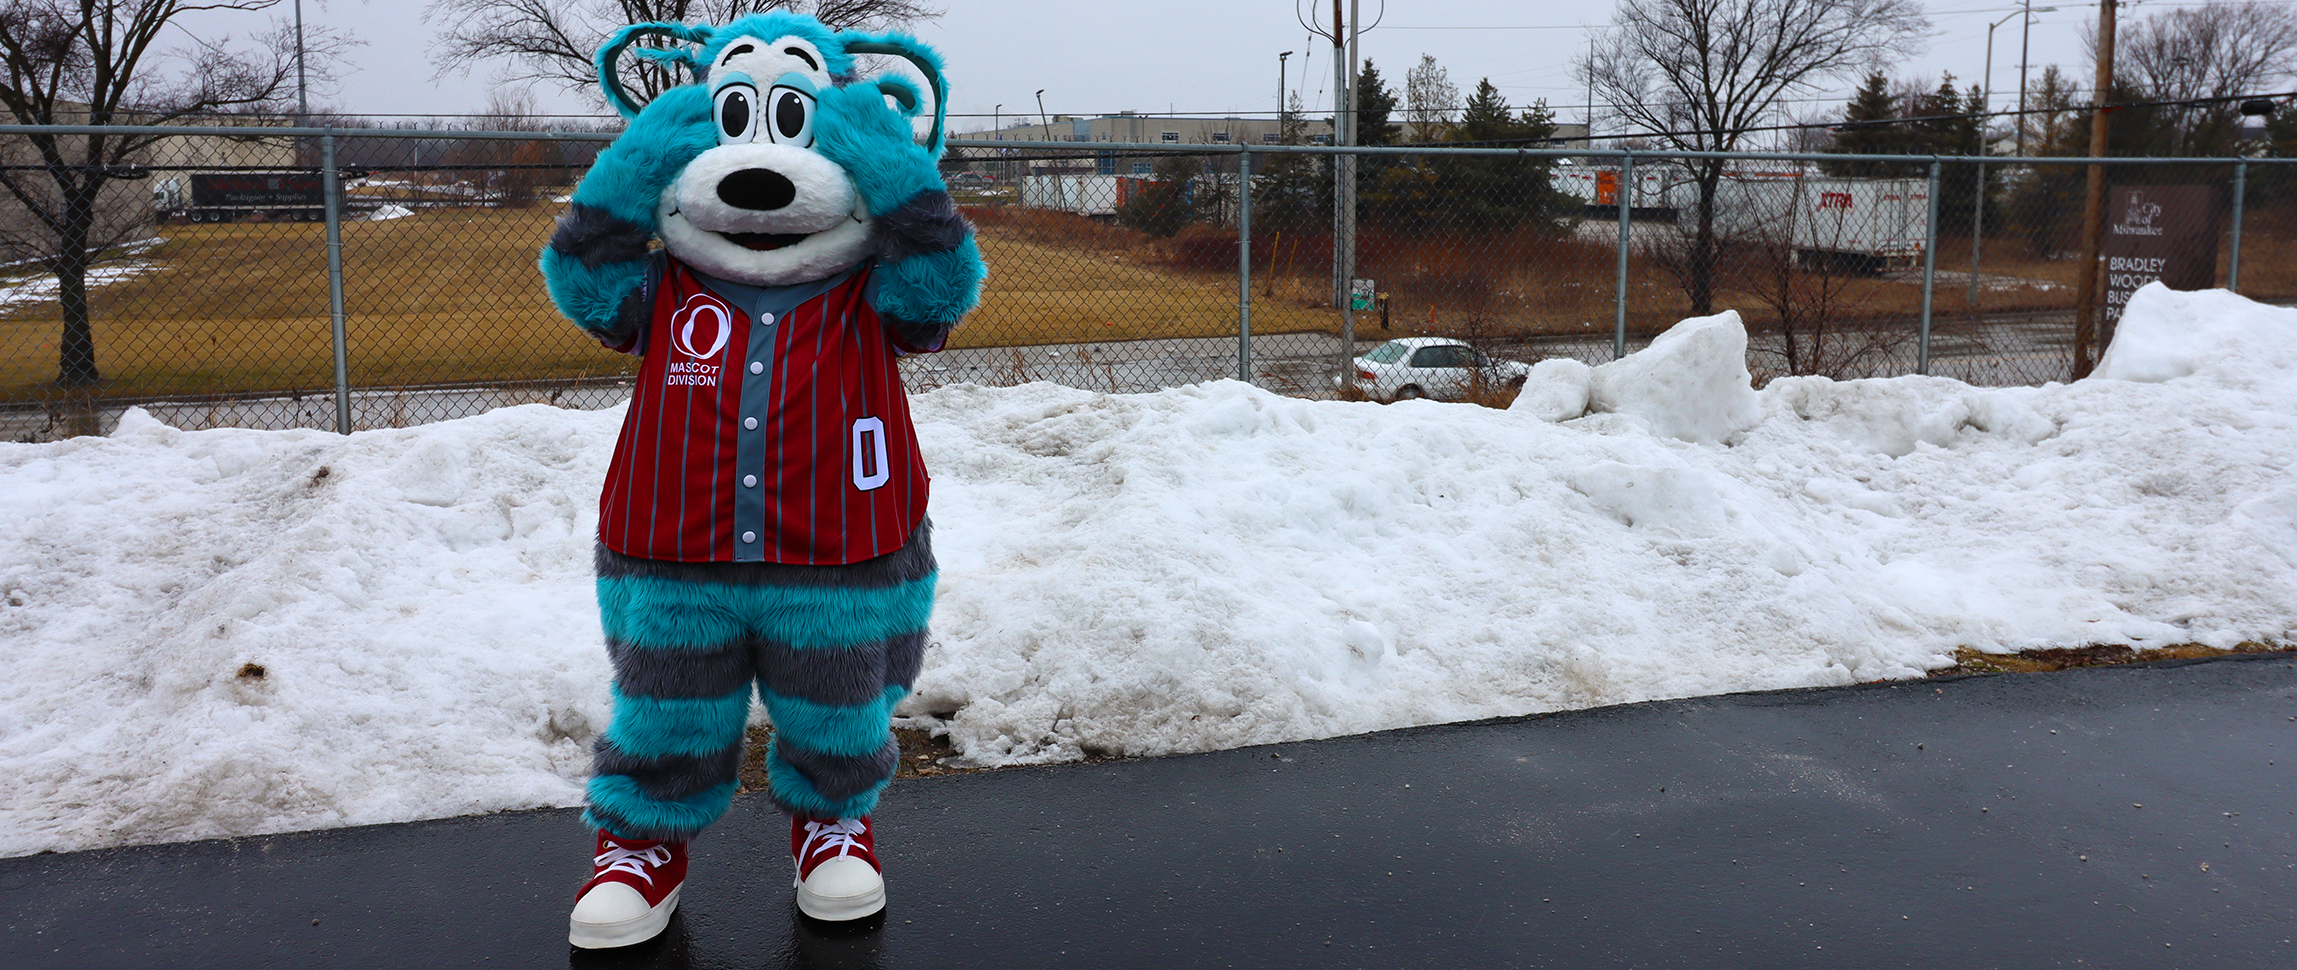 A Mascot in front of a snow bank.